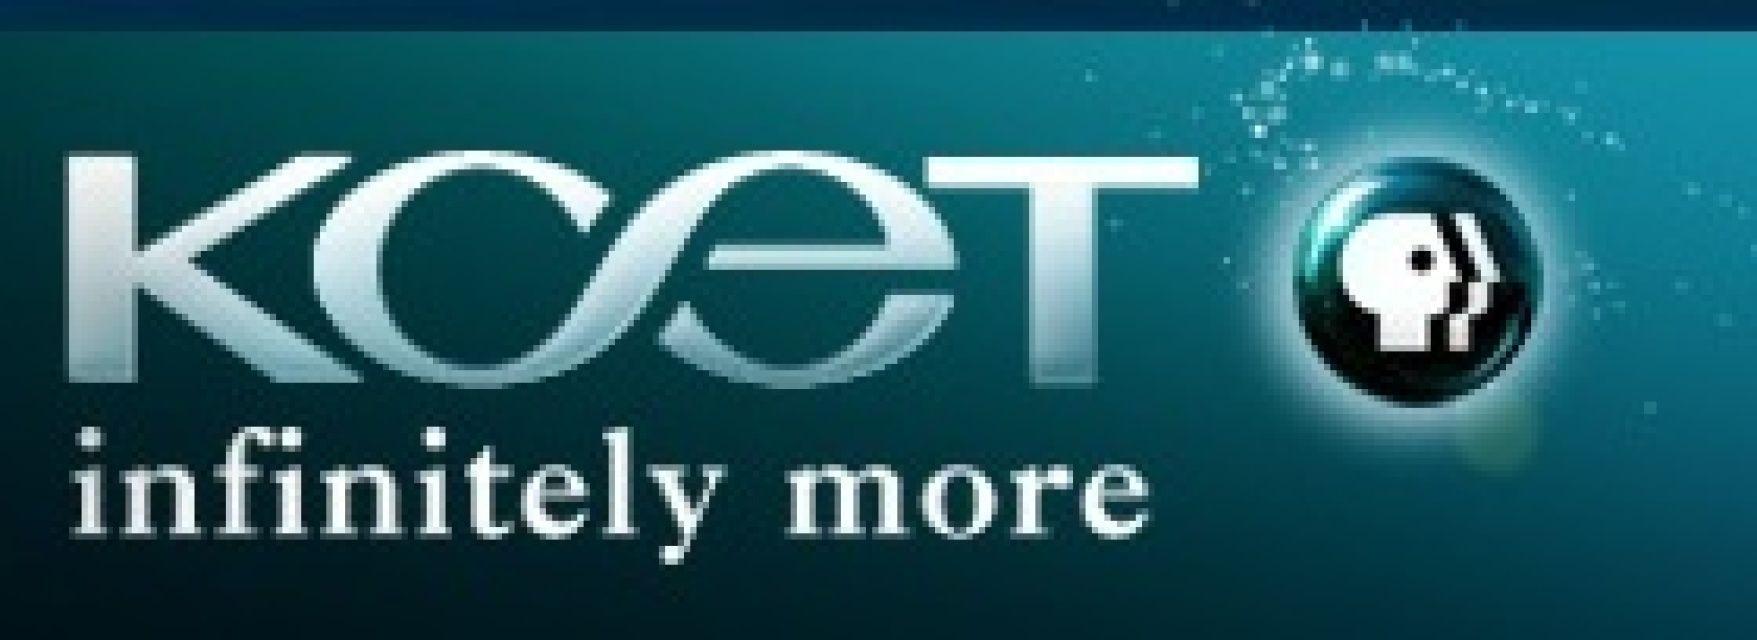 KCET Logo - KCET Says Goodbye to PBS, Will go Independent January 1st [Updated ...